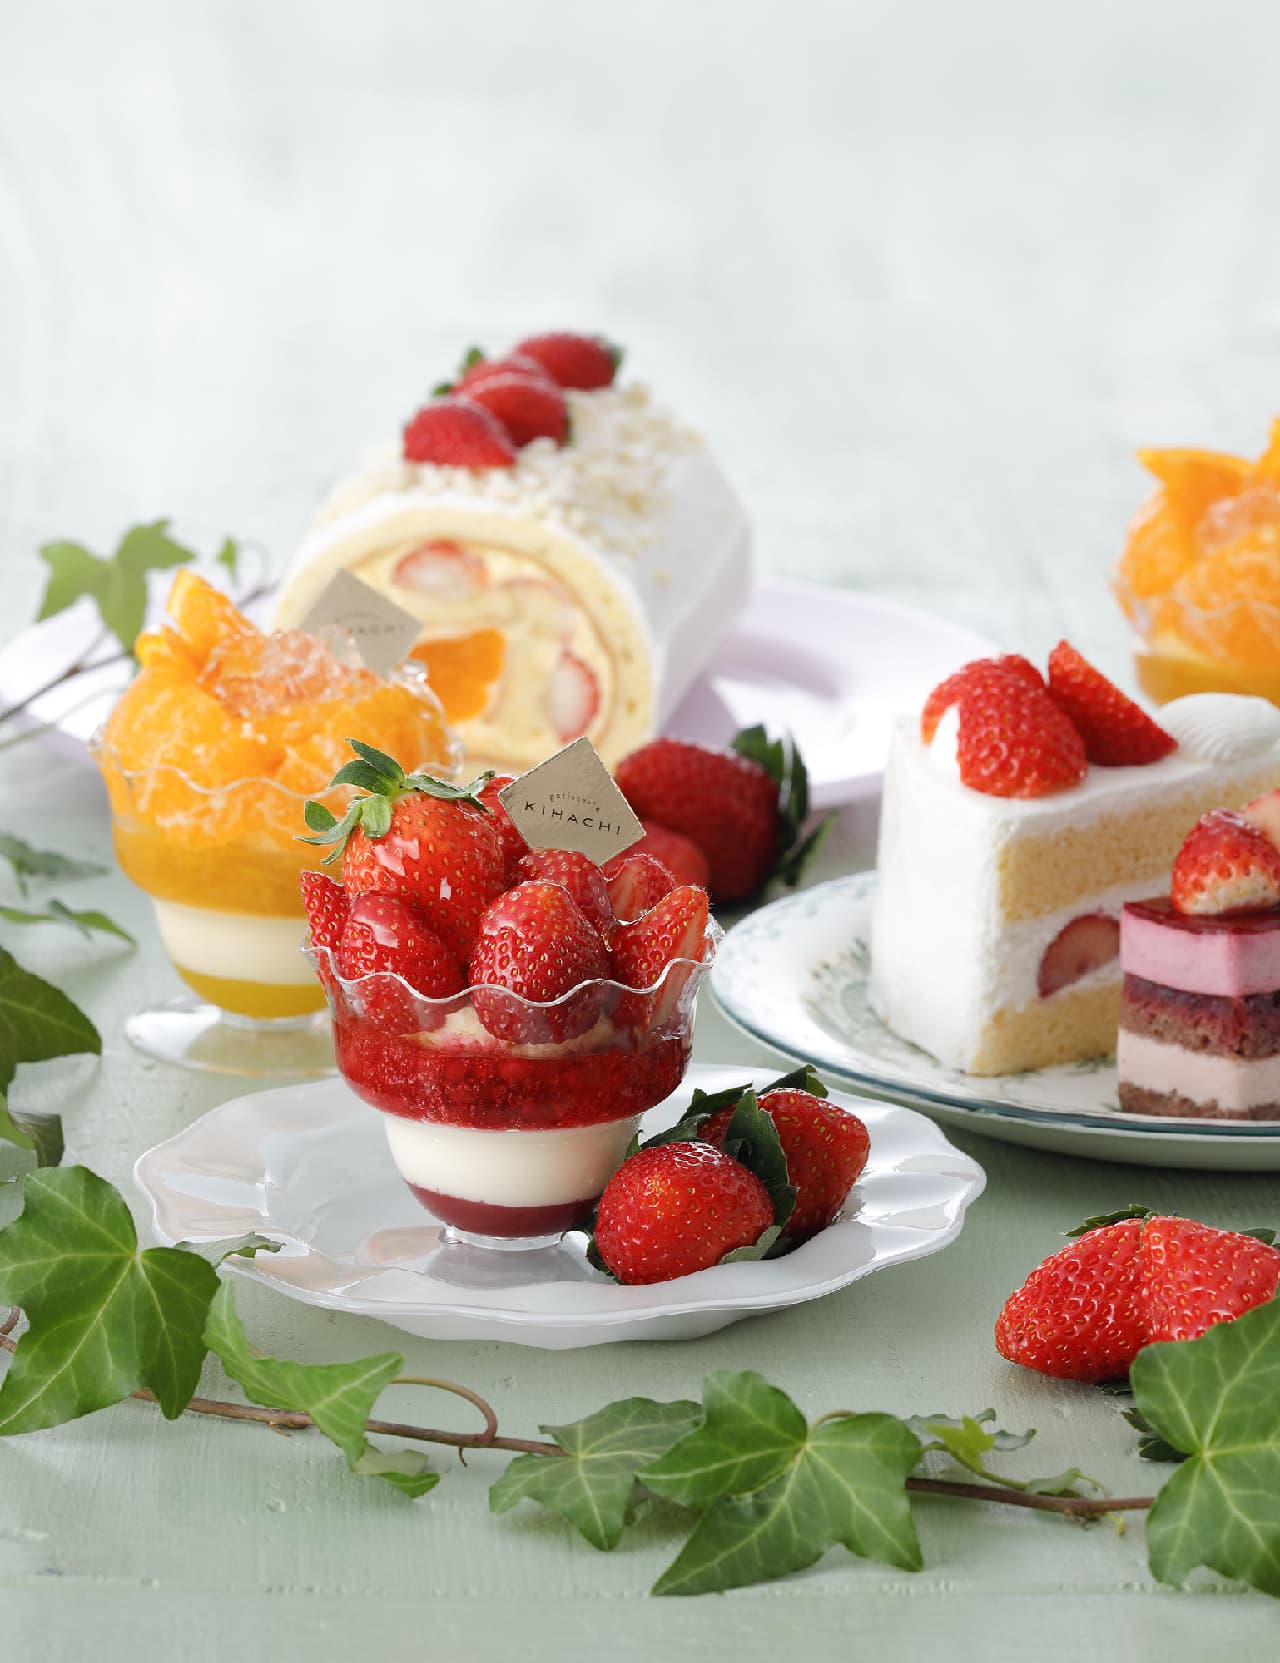 Sweets using Tochiotome strawberries and seasonal citrus fruits